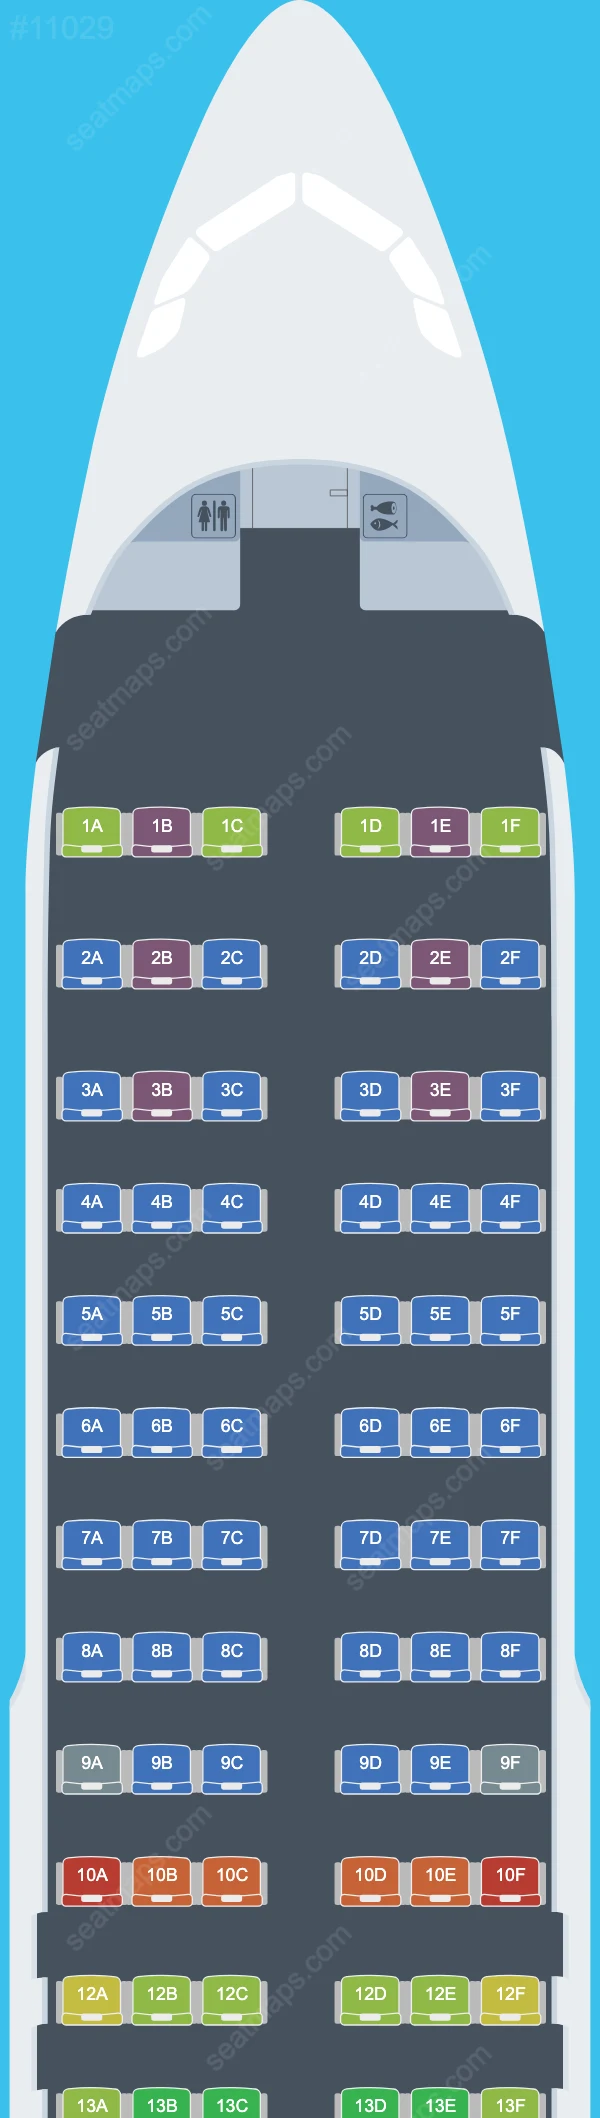 LIFT Airbus A320 Seat Maps A320-200